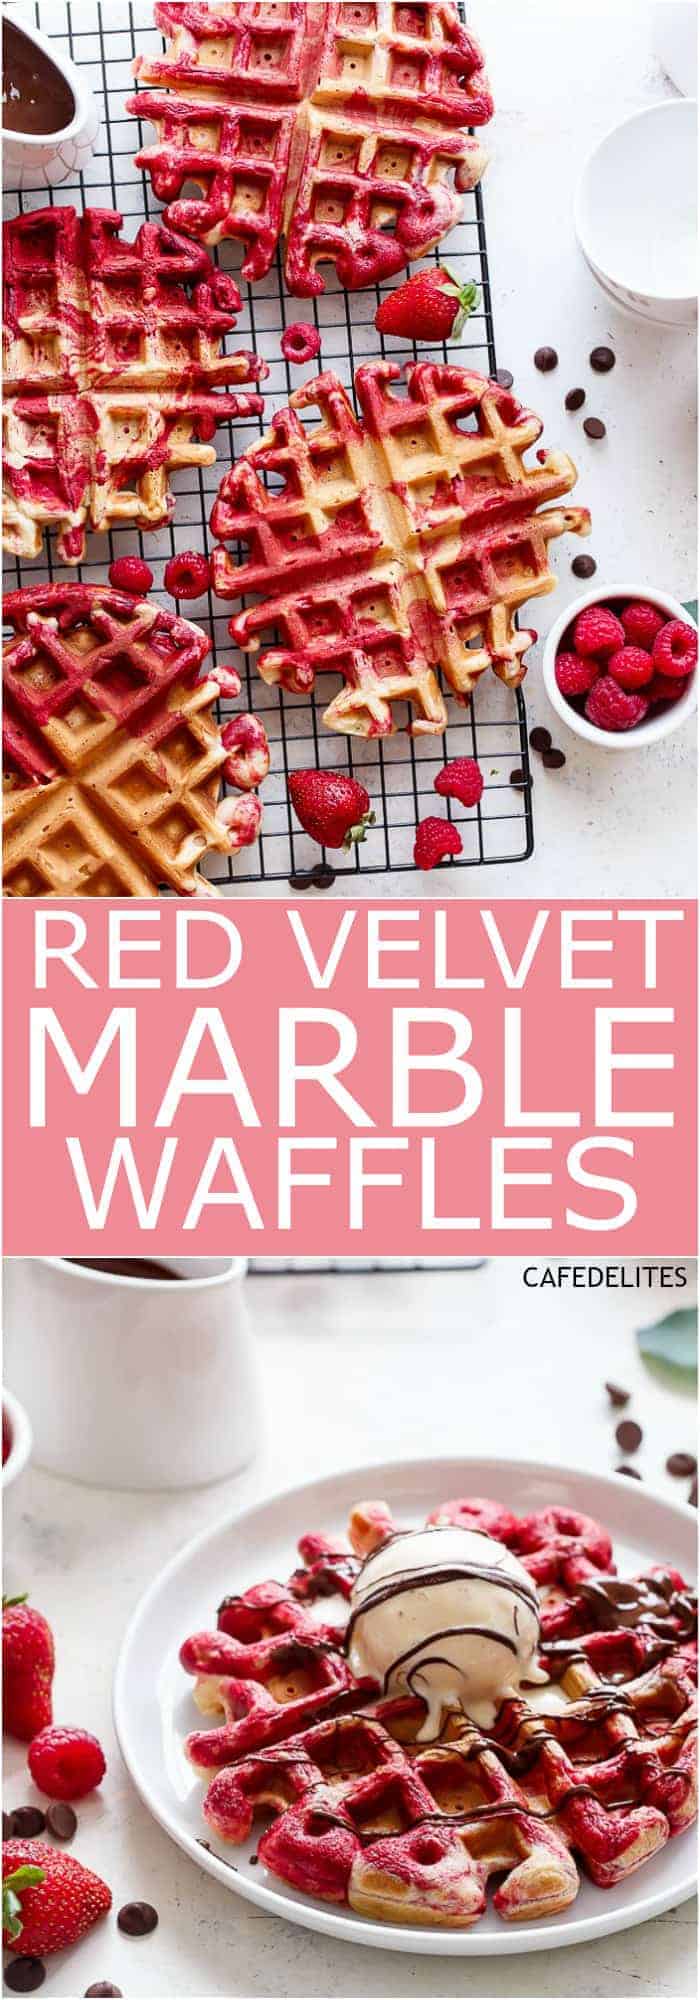 Red Velvet Marbled Waffles or Valentine's Day Waffles made healthier with Greek Yogurt are absolutely incredible! Drizzled in melted chocolate and top with ice cream for extra indulgence! | https://cafedelites.com